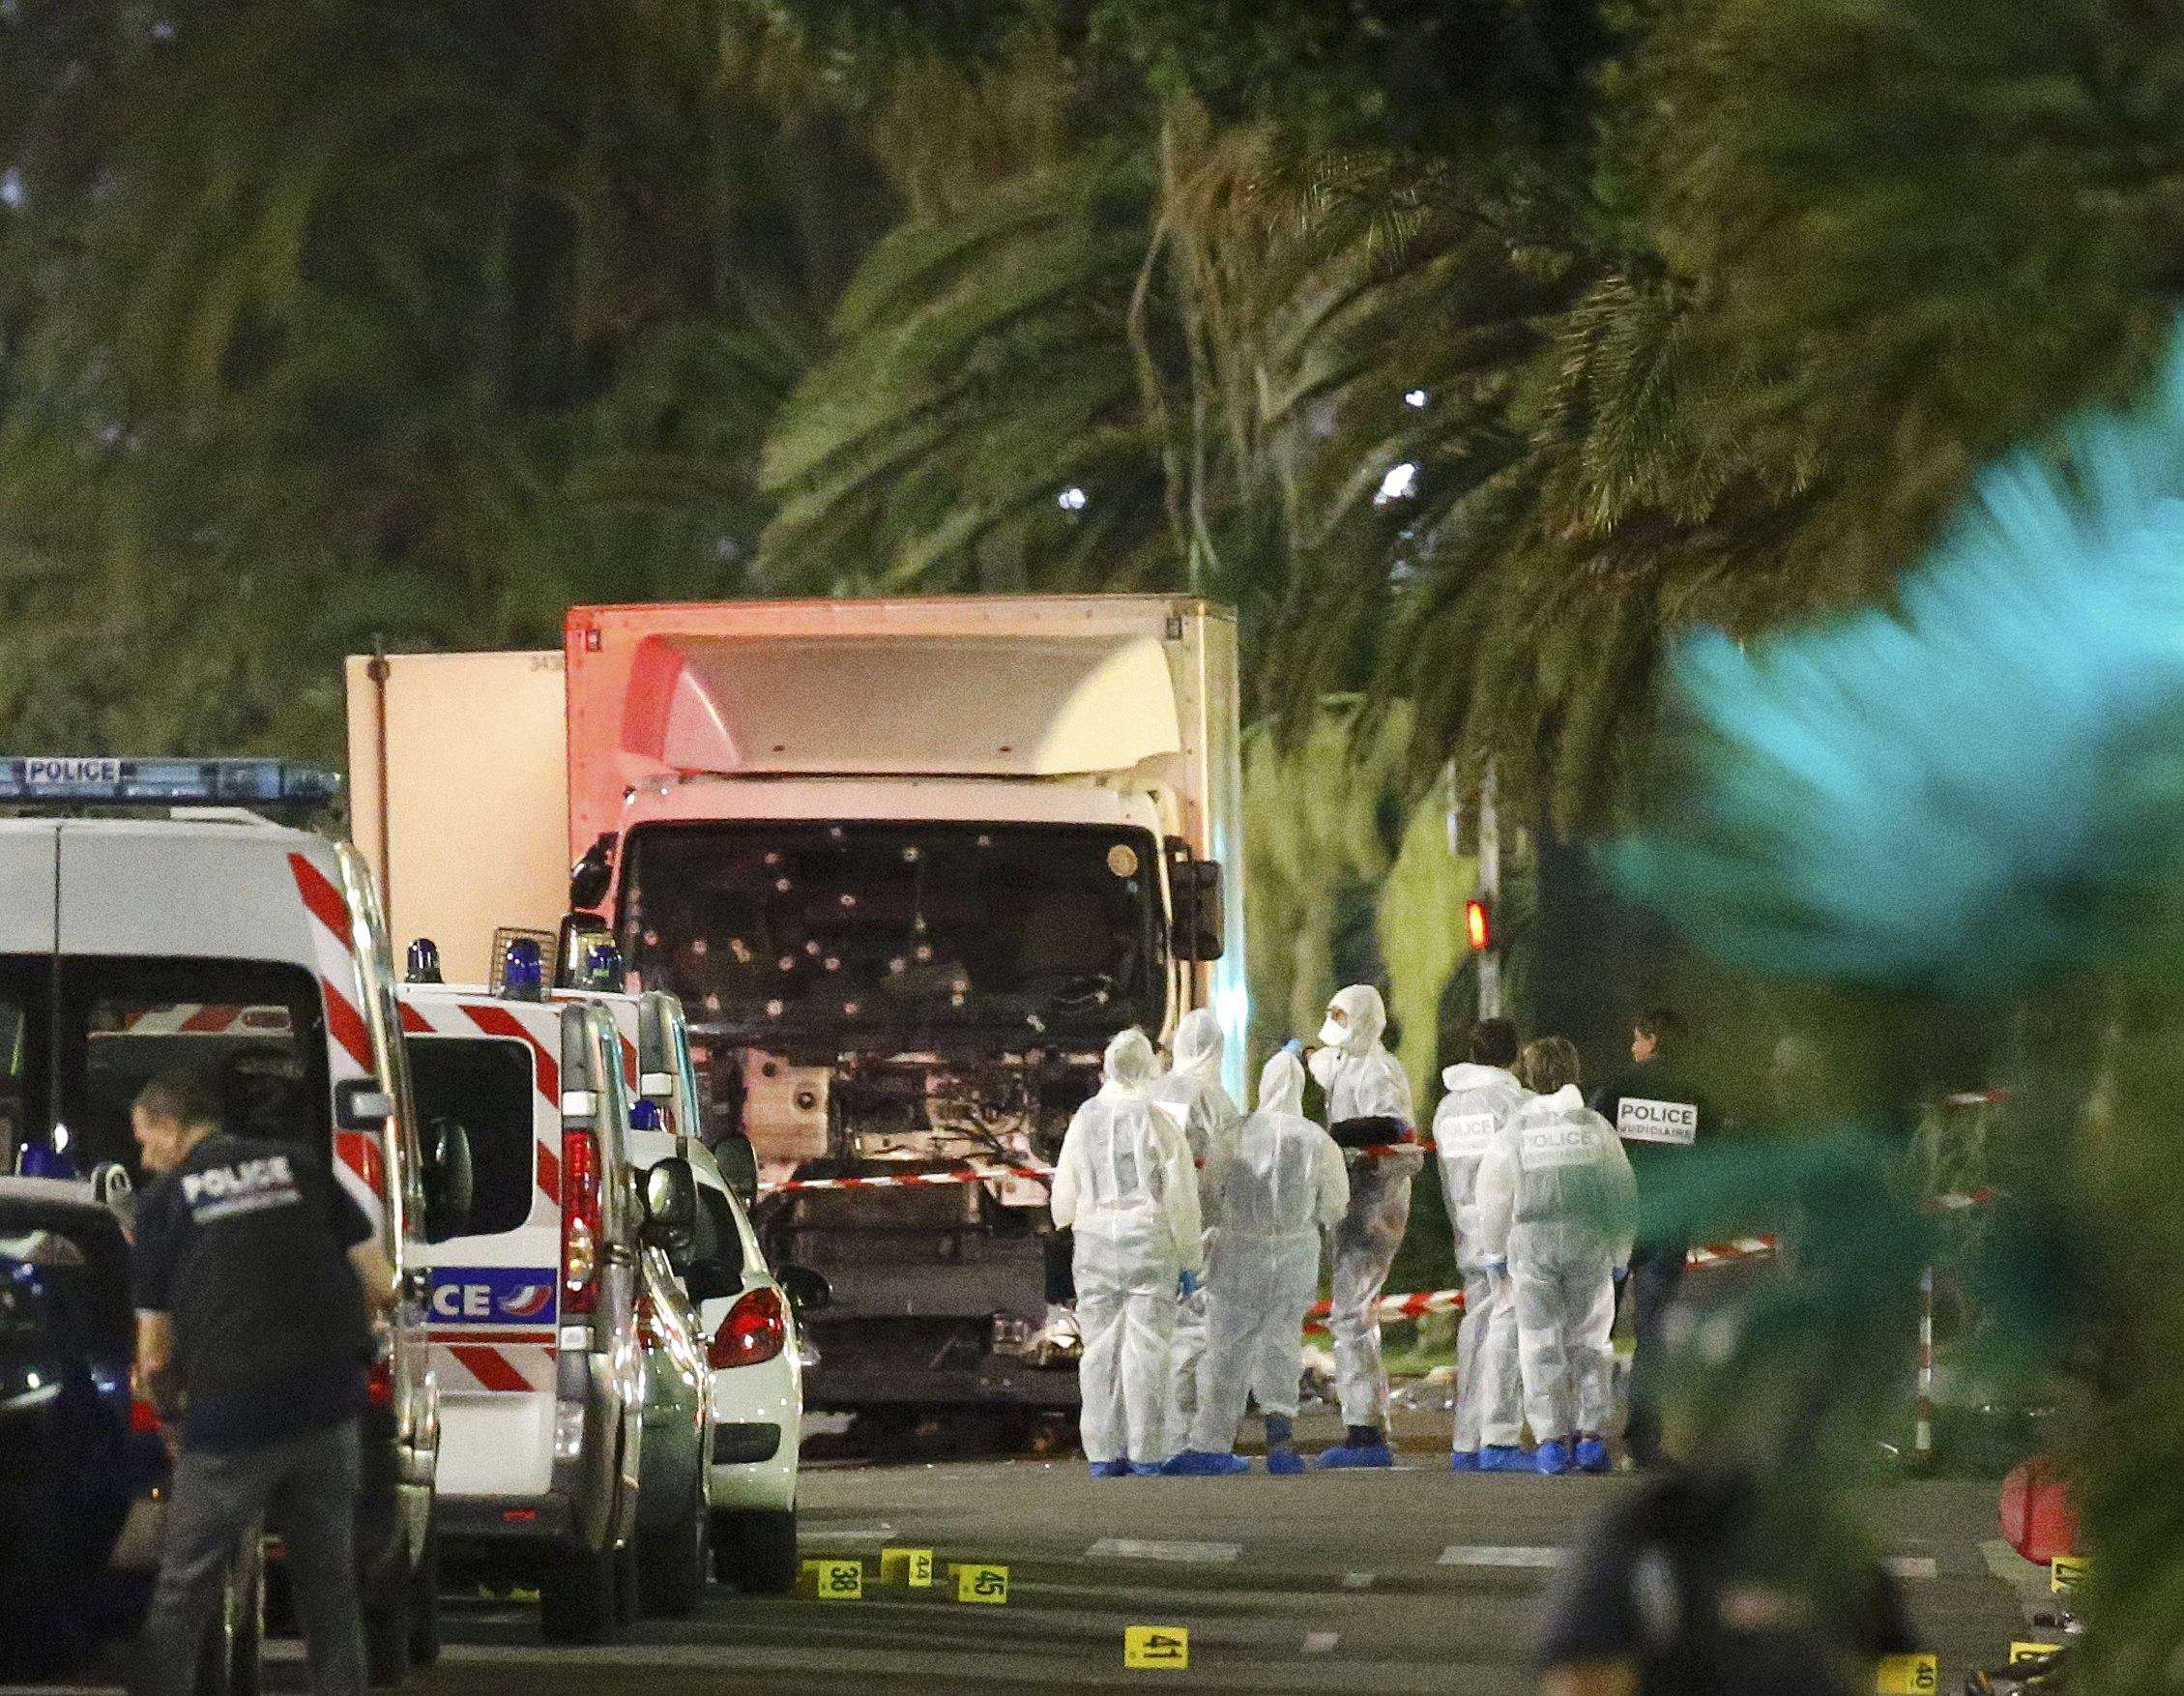 French police and forensic officers stand next to the truck used in the Bastille Day attack in Nice. Photo: Reuters